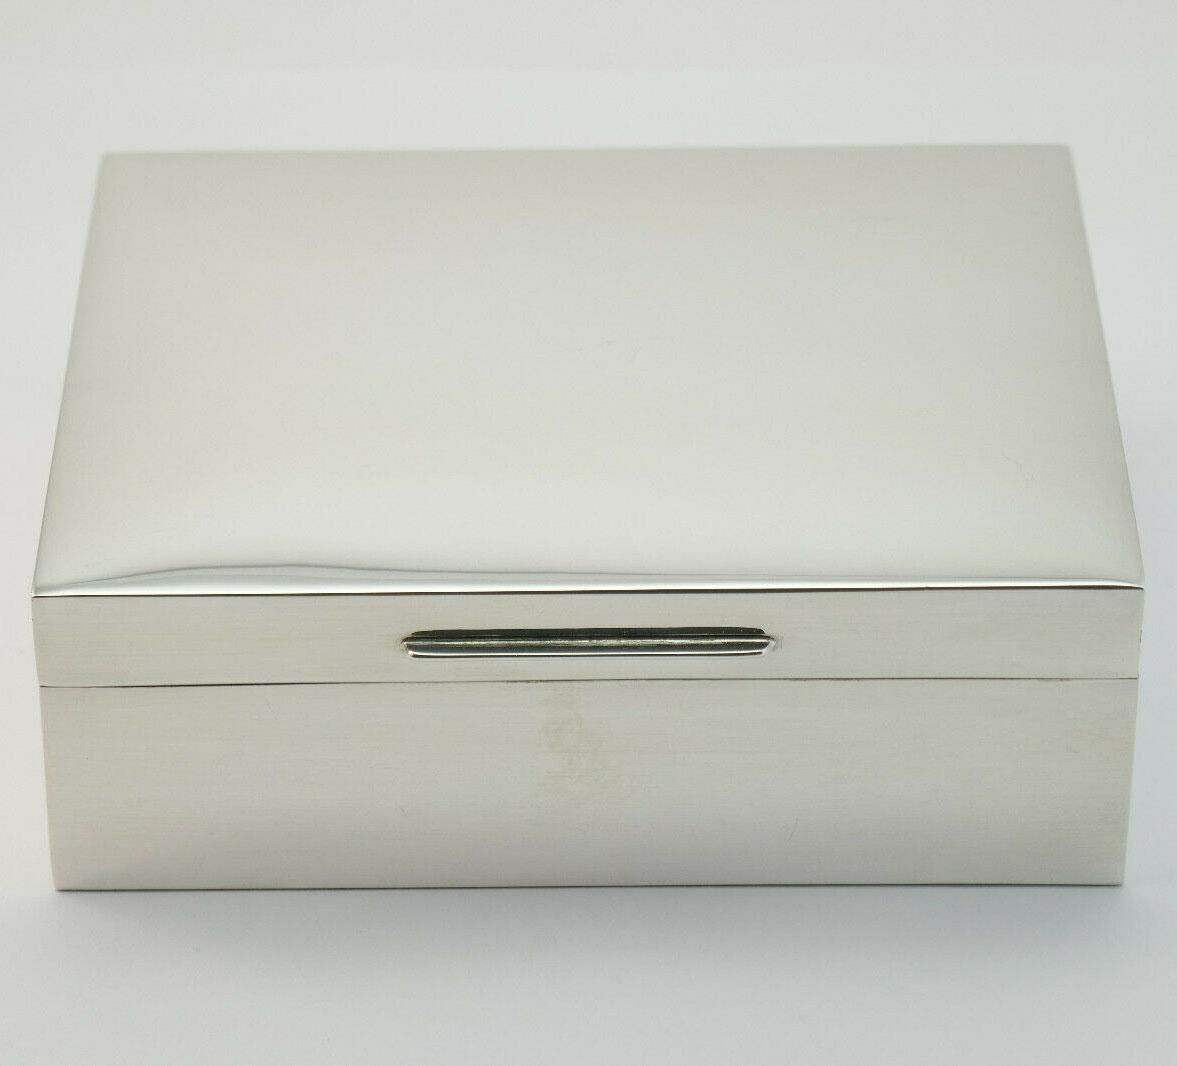 Vintage, stylish and decorative modernist sterling silver cigar, cigarette and/or jewelry box sleek polished surface; the box has a black leatherette base, and is fully lined with cedar wood. The side of the box is fully hallmarked with Lion passant